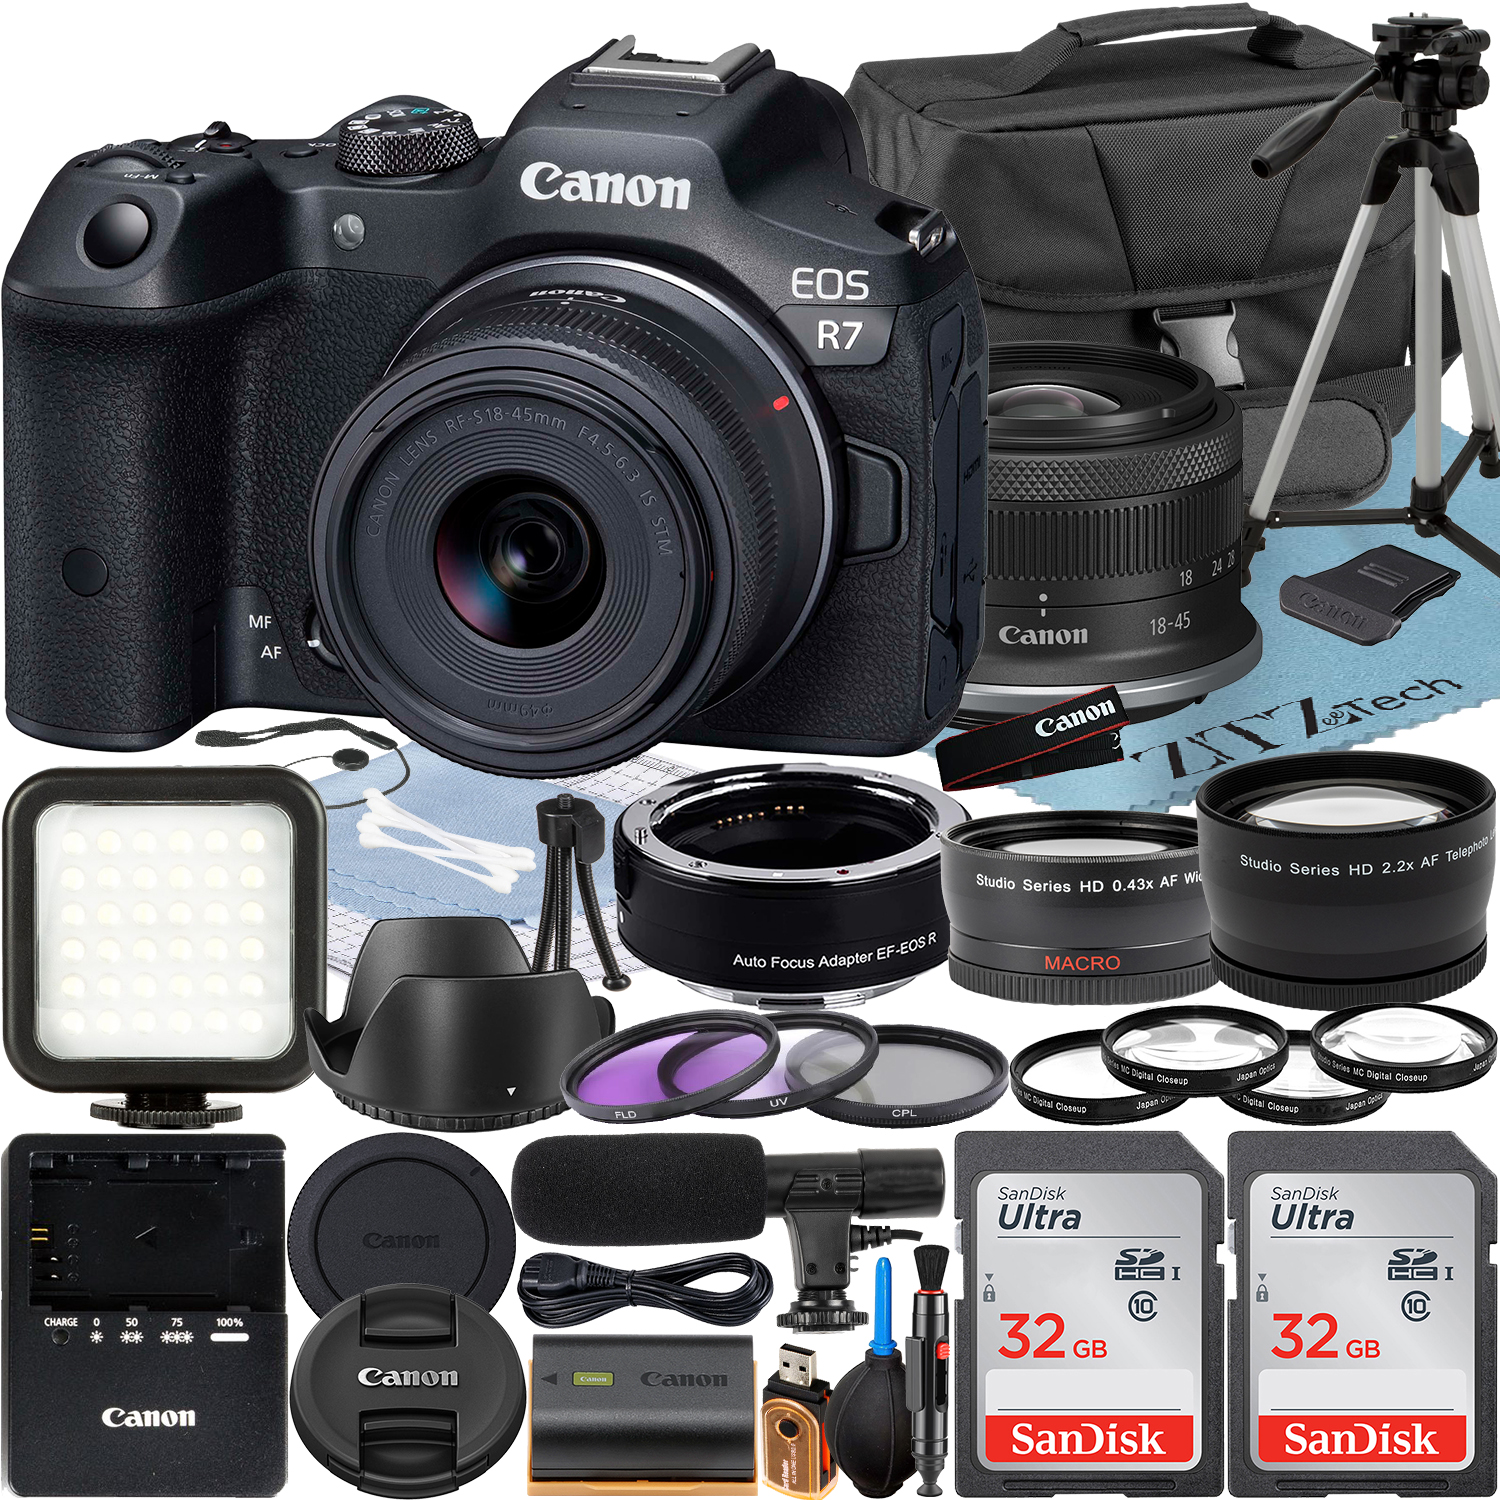 Canon EOS R7 Mirrorless Camera with RF-S 18-45mm Lens + Mount Adapter + 2 Pack SanDisk 32GB Memory Card + Case + ZeeTech Accessory